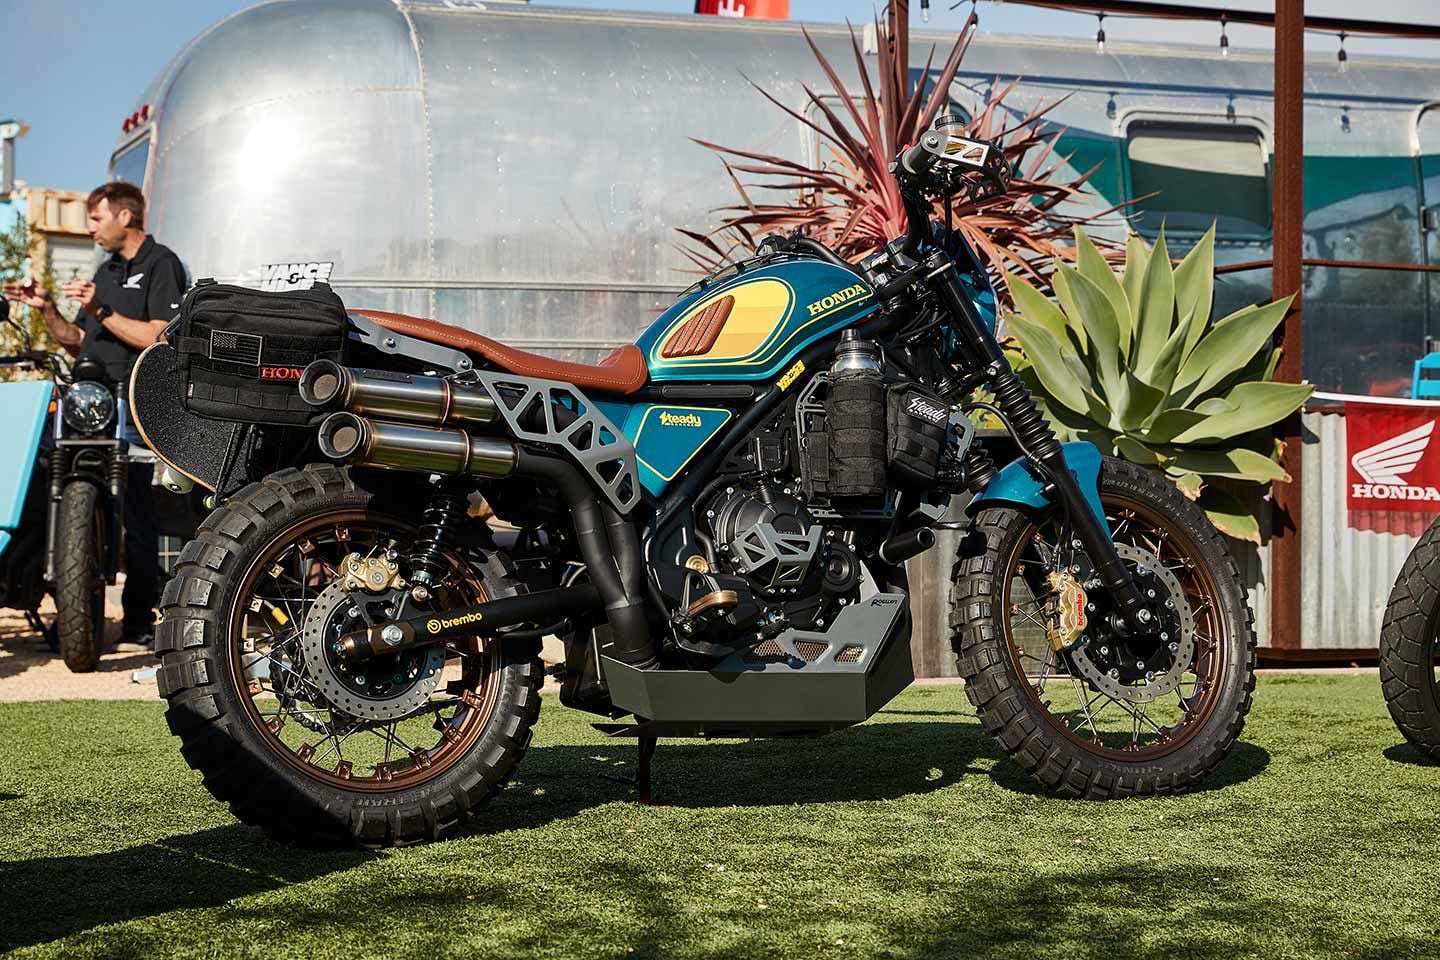 Honda has a number of accessories already available for the SCL500, but for a better idea what the bike can look like when customized, it tasked Steady Garage with doing a custom build. Camping trip, anyone?